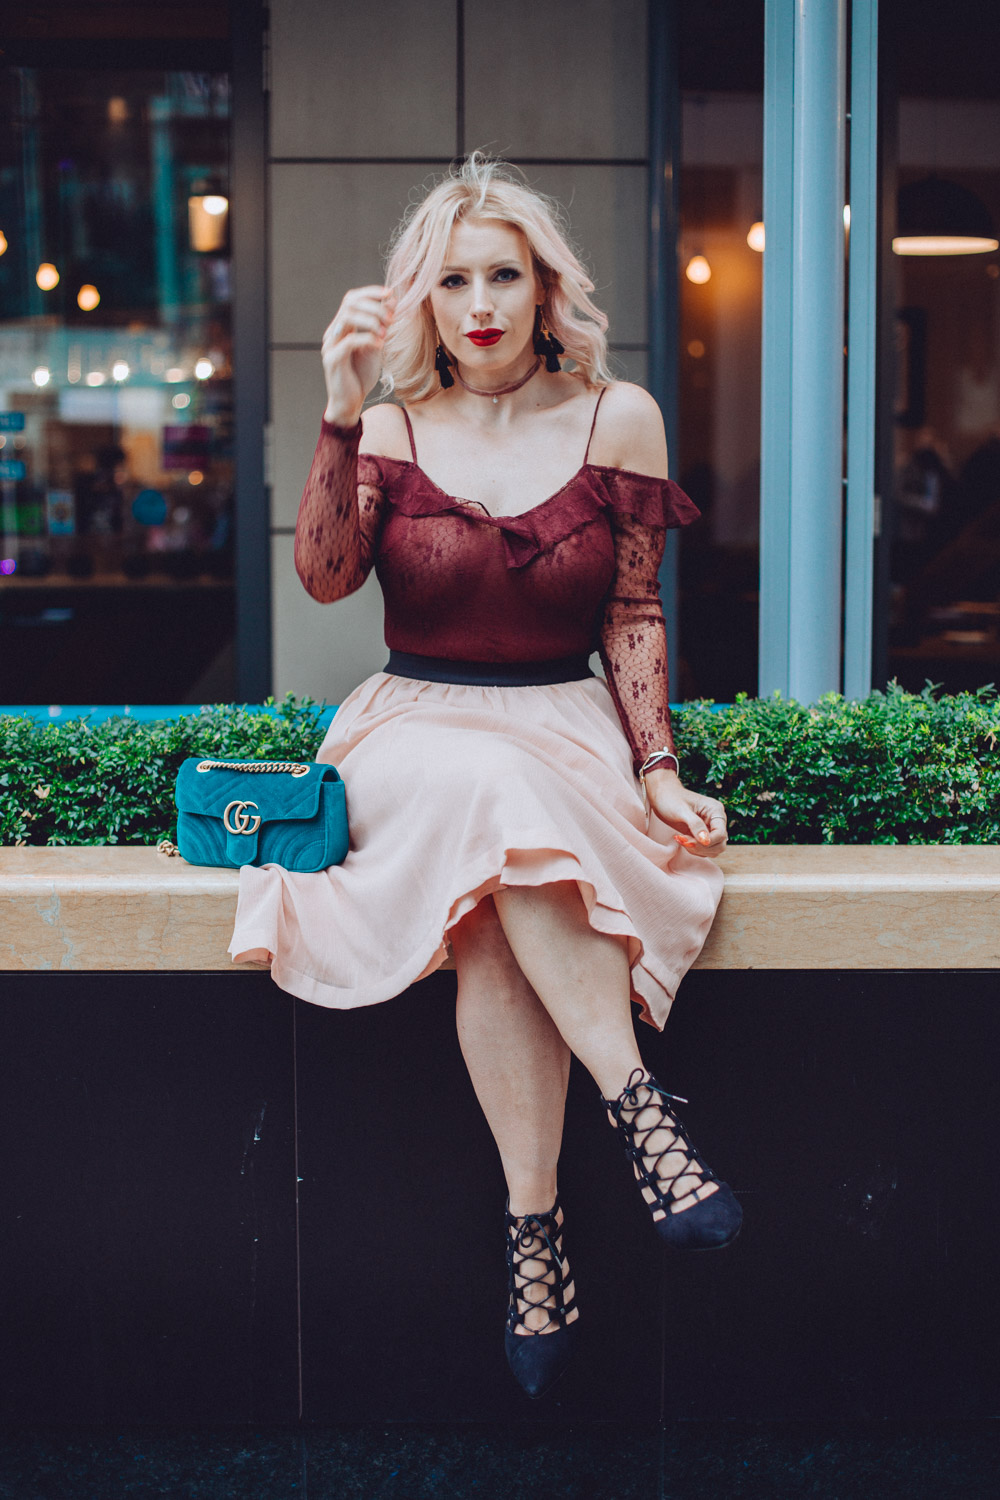 Gucci Velvet Marmont, Miu Miu Sunglasses, lace body and pink skirt. fashion blogger style